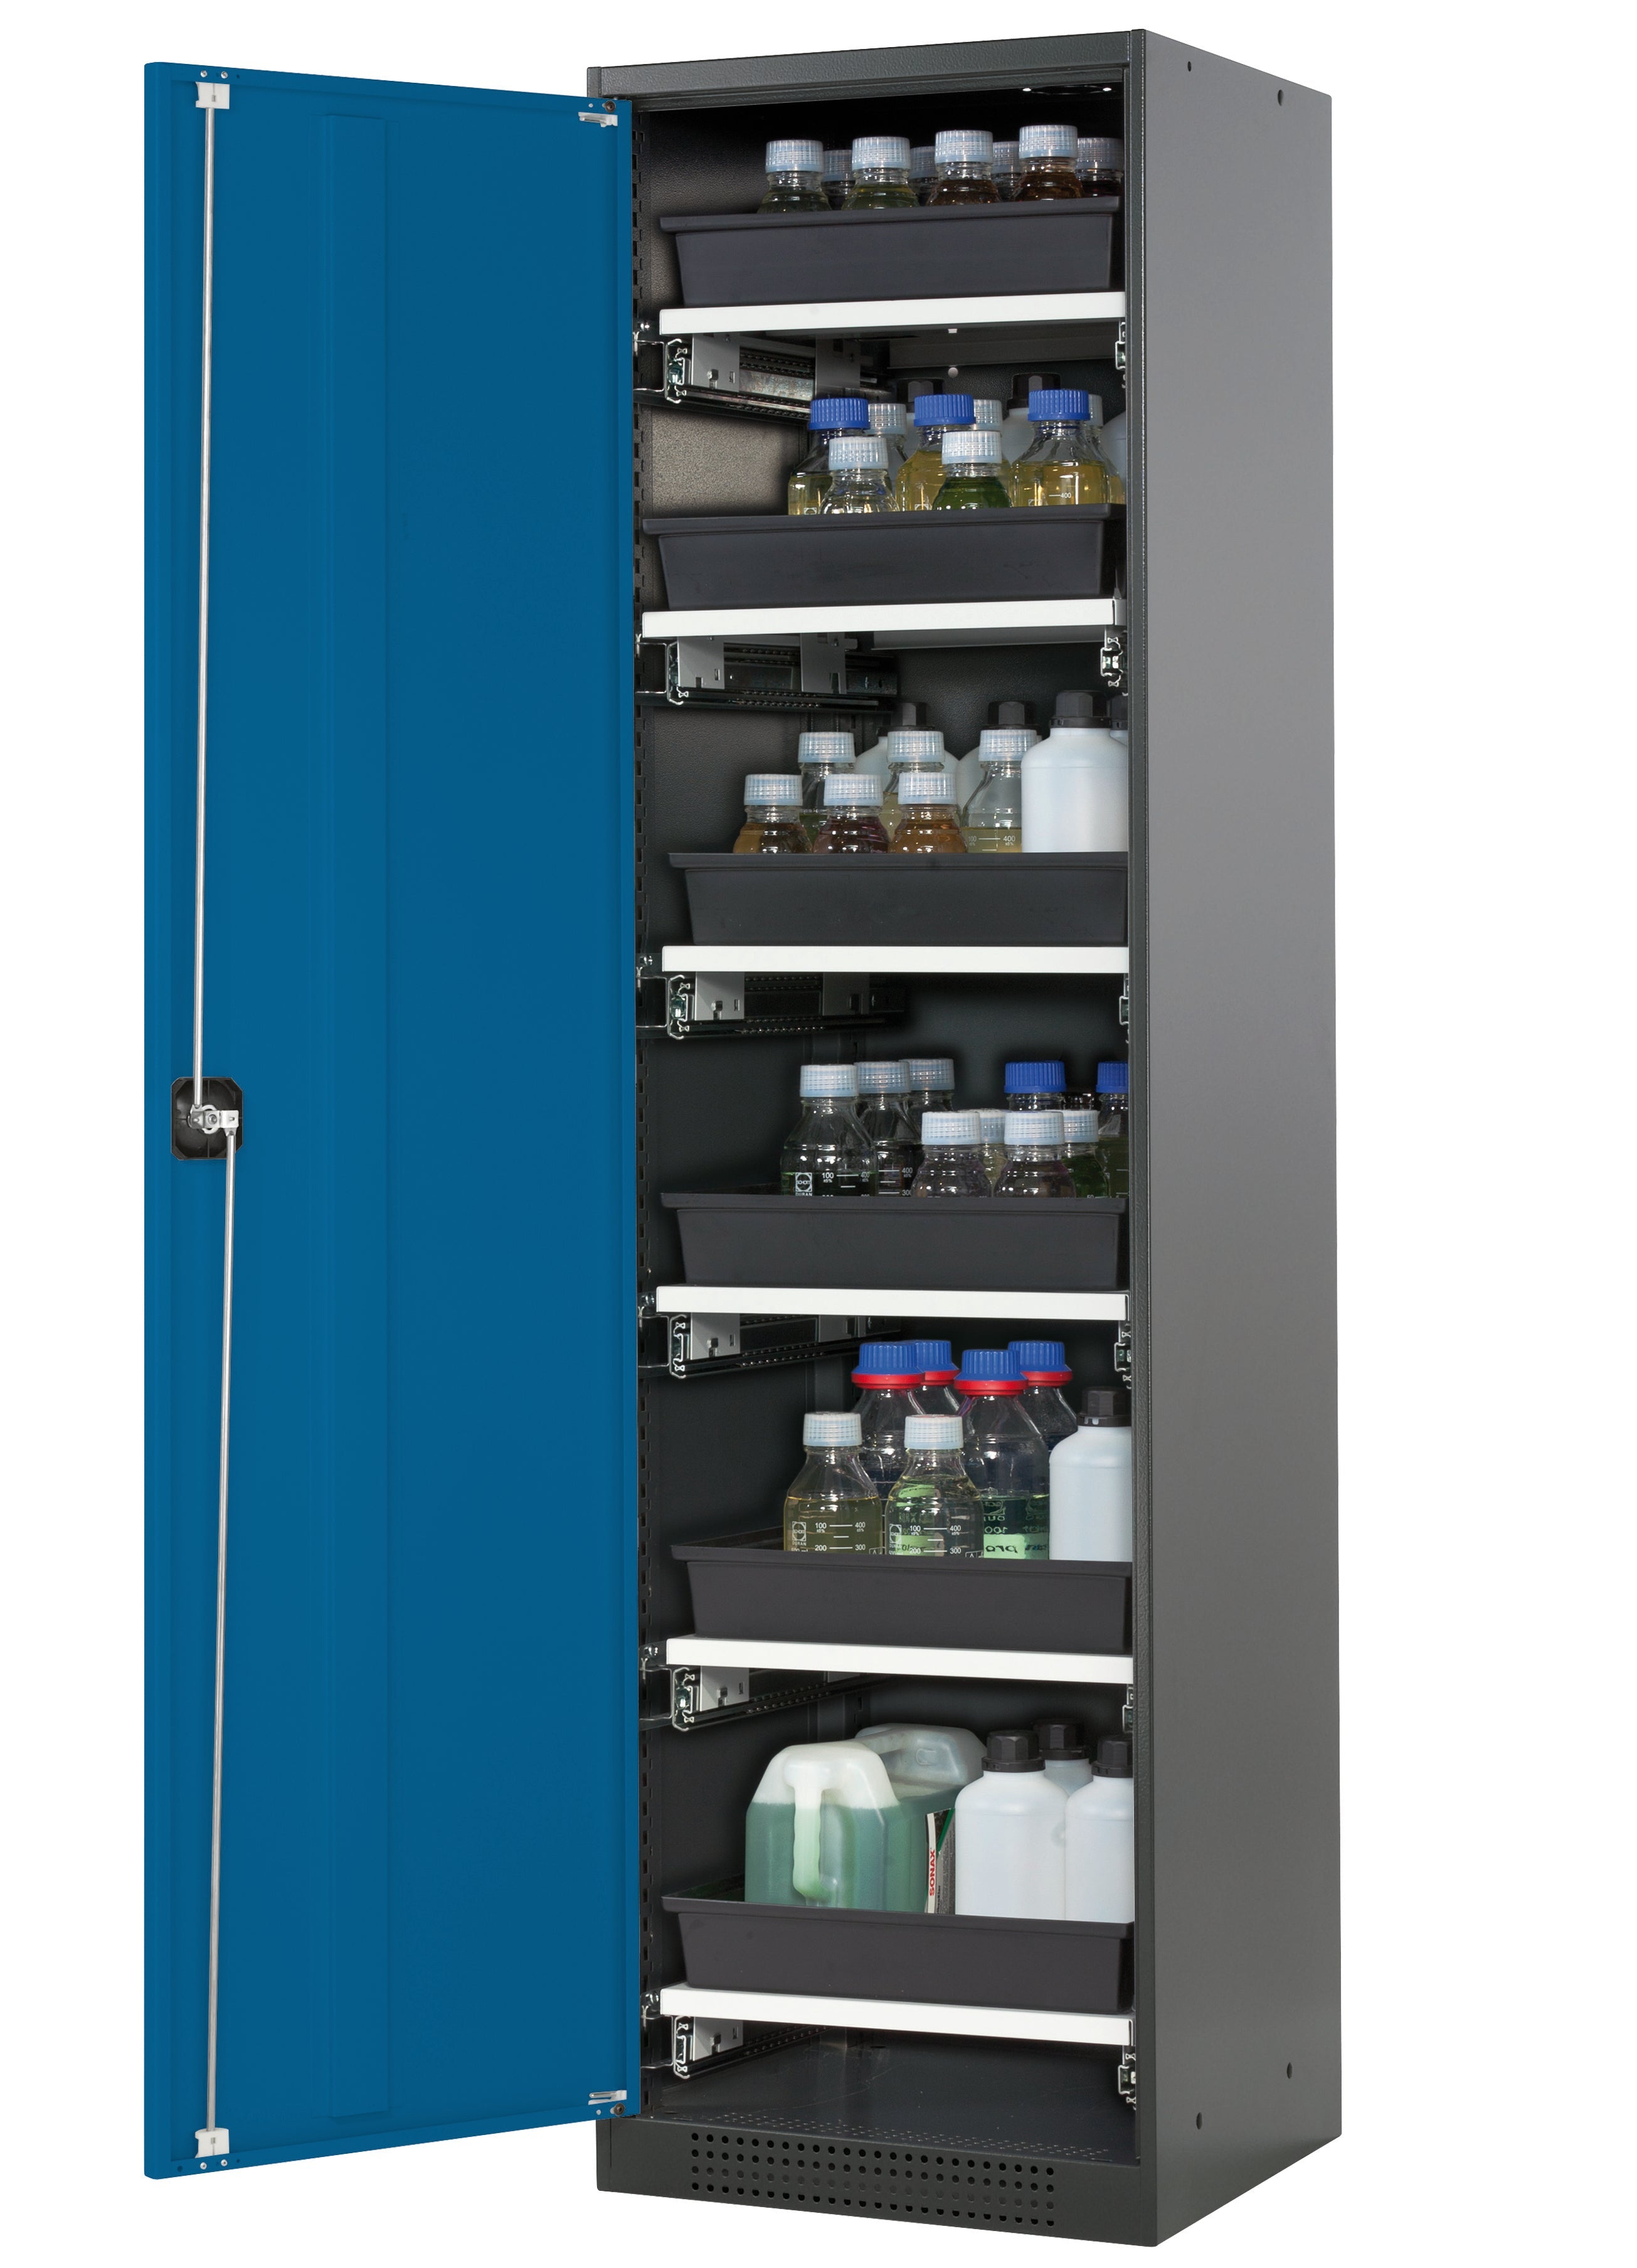 Chemical cabinet CS-CLASSIC model CS.195.054 in gentian blue RAL 5010 with 6x AbZ pull-out shelves (sheet steel/polypropylene)